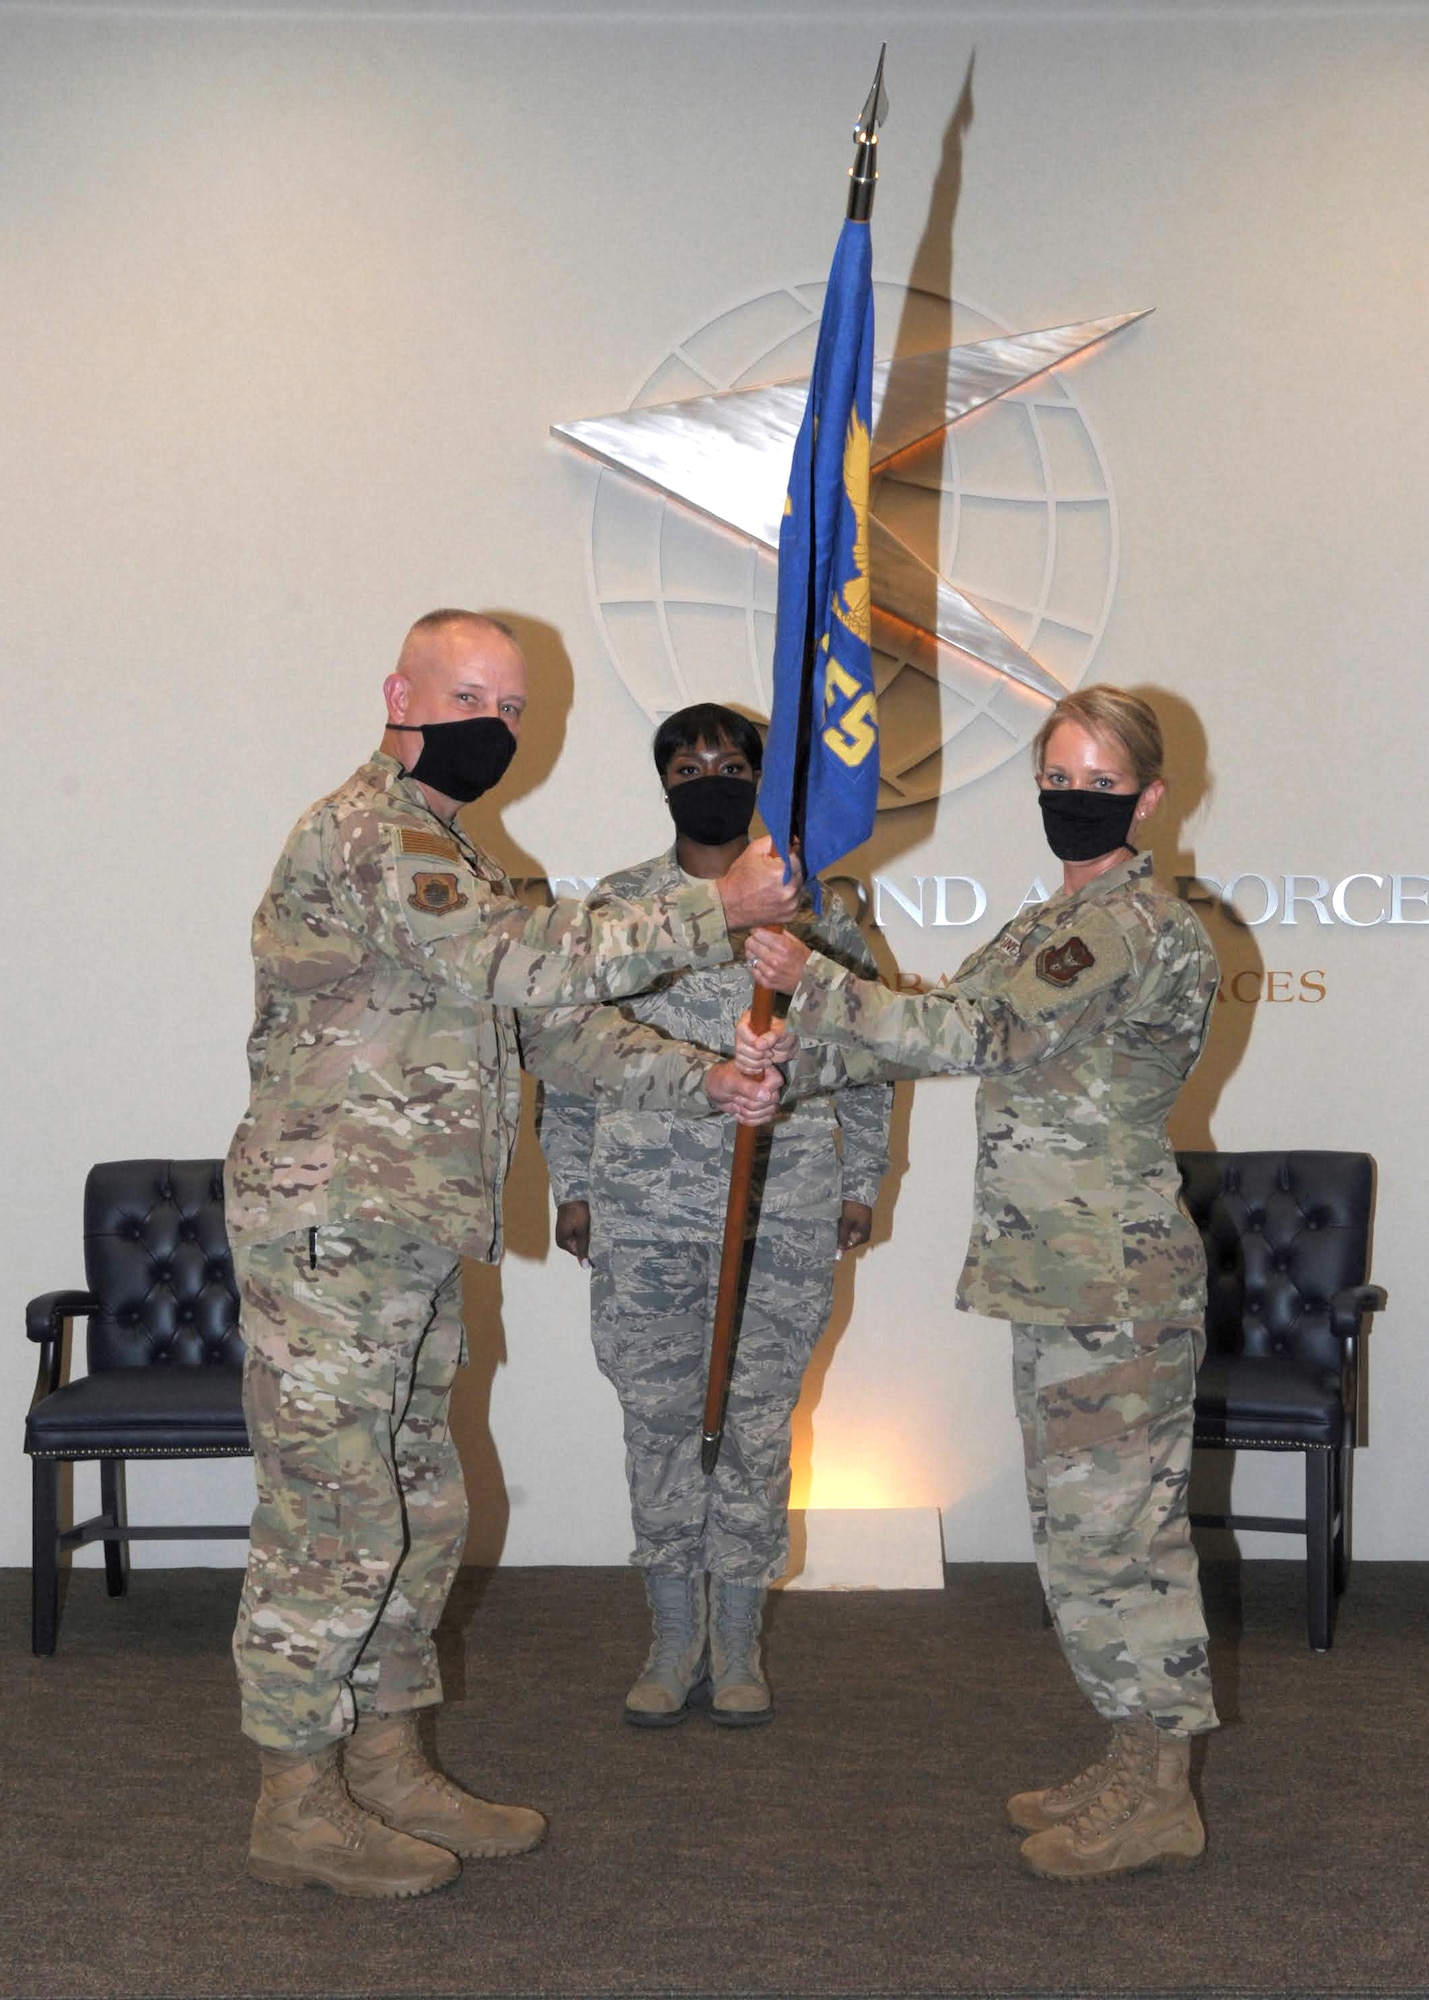 Colonel Joseph Revit, 94th Mission Support Group commander, passes the guidon to Lt. Col. Emily Steinfort, incoming commander of the 94th Civil Engineer Squadron, Aug. 1, 2020, at the 22nd Air Force Headquarters. Steinfort plans to surpass the expectations of Headquarters so that her Airmen are ready for anything. (U.S. Air Force photo by Senior Airman Shelby Thurman)